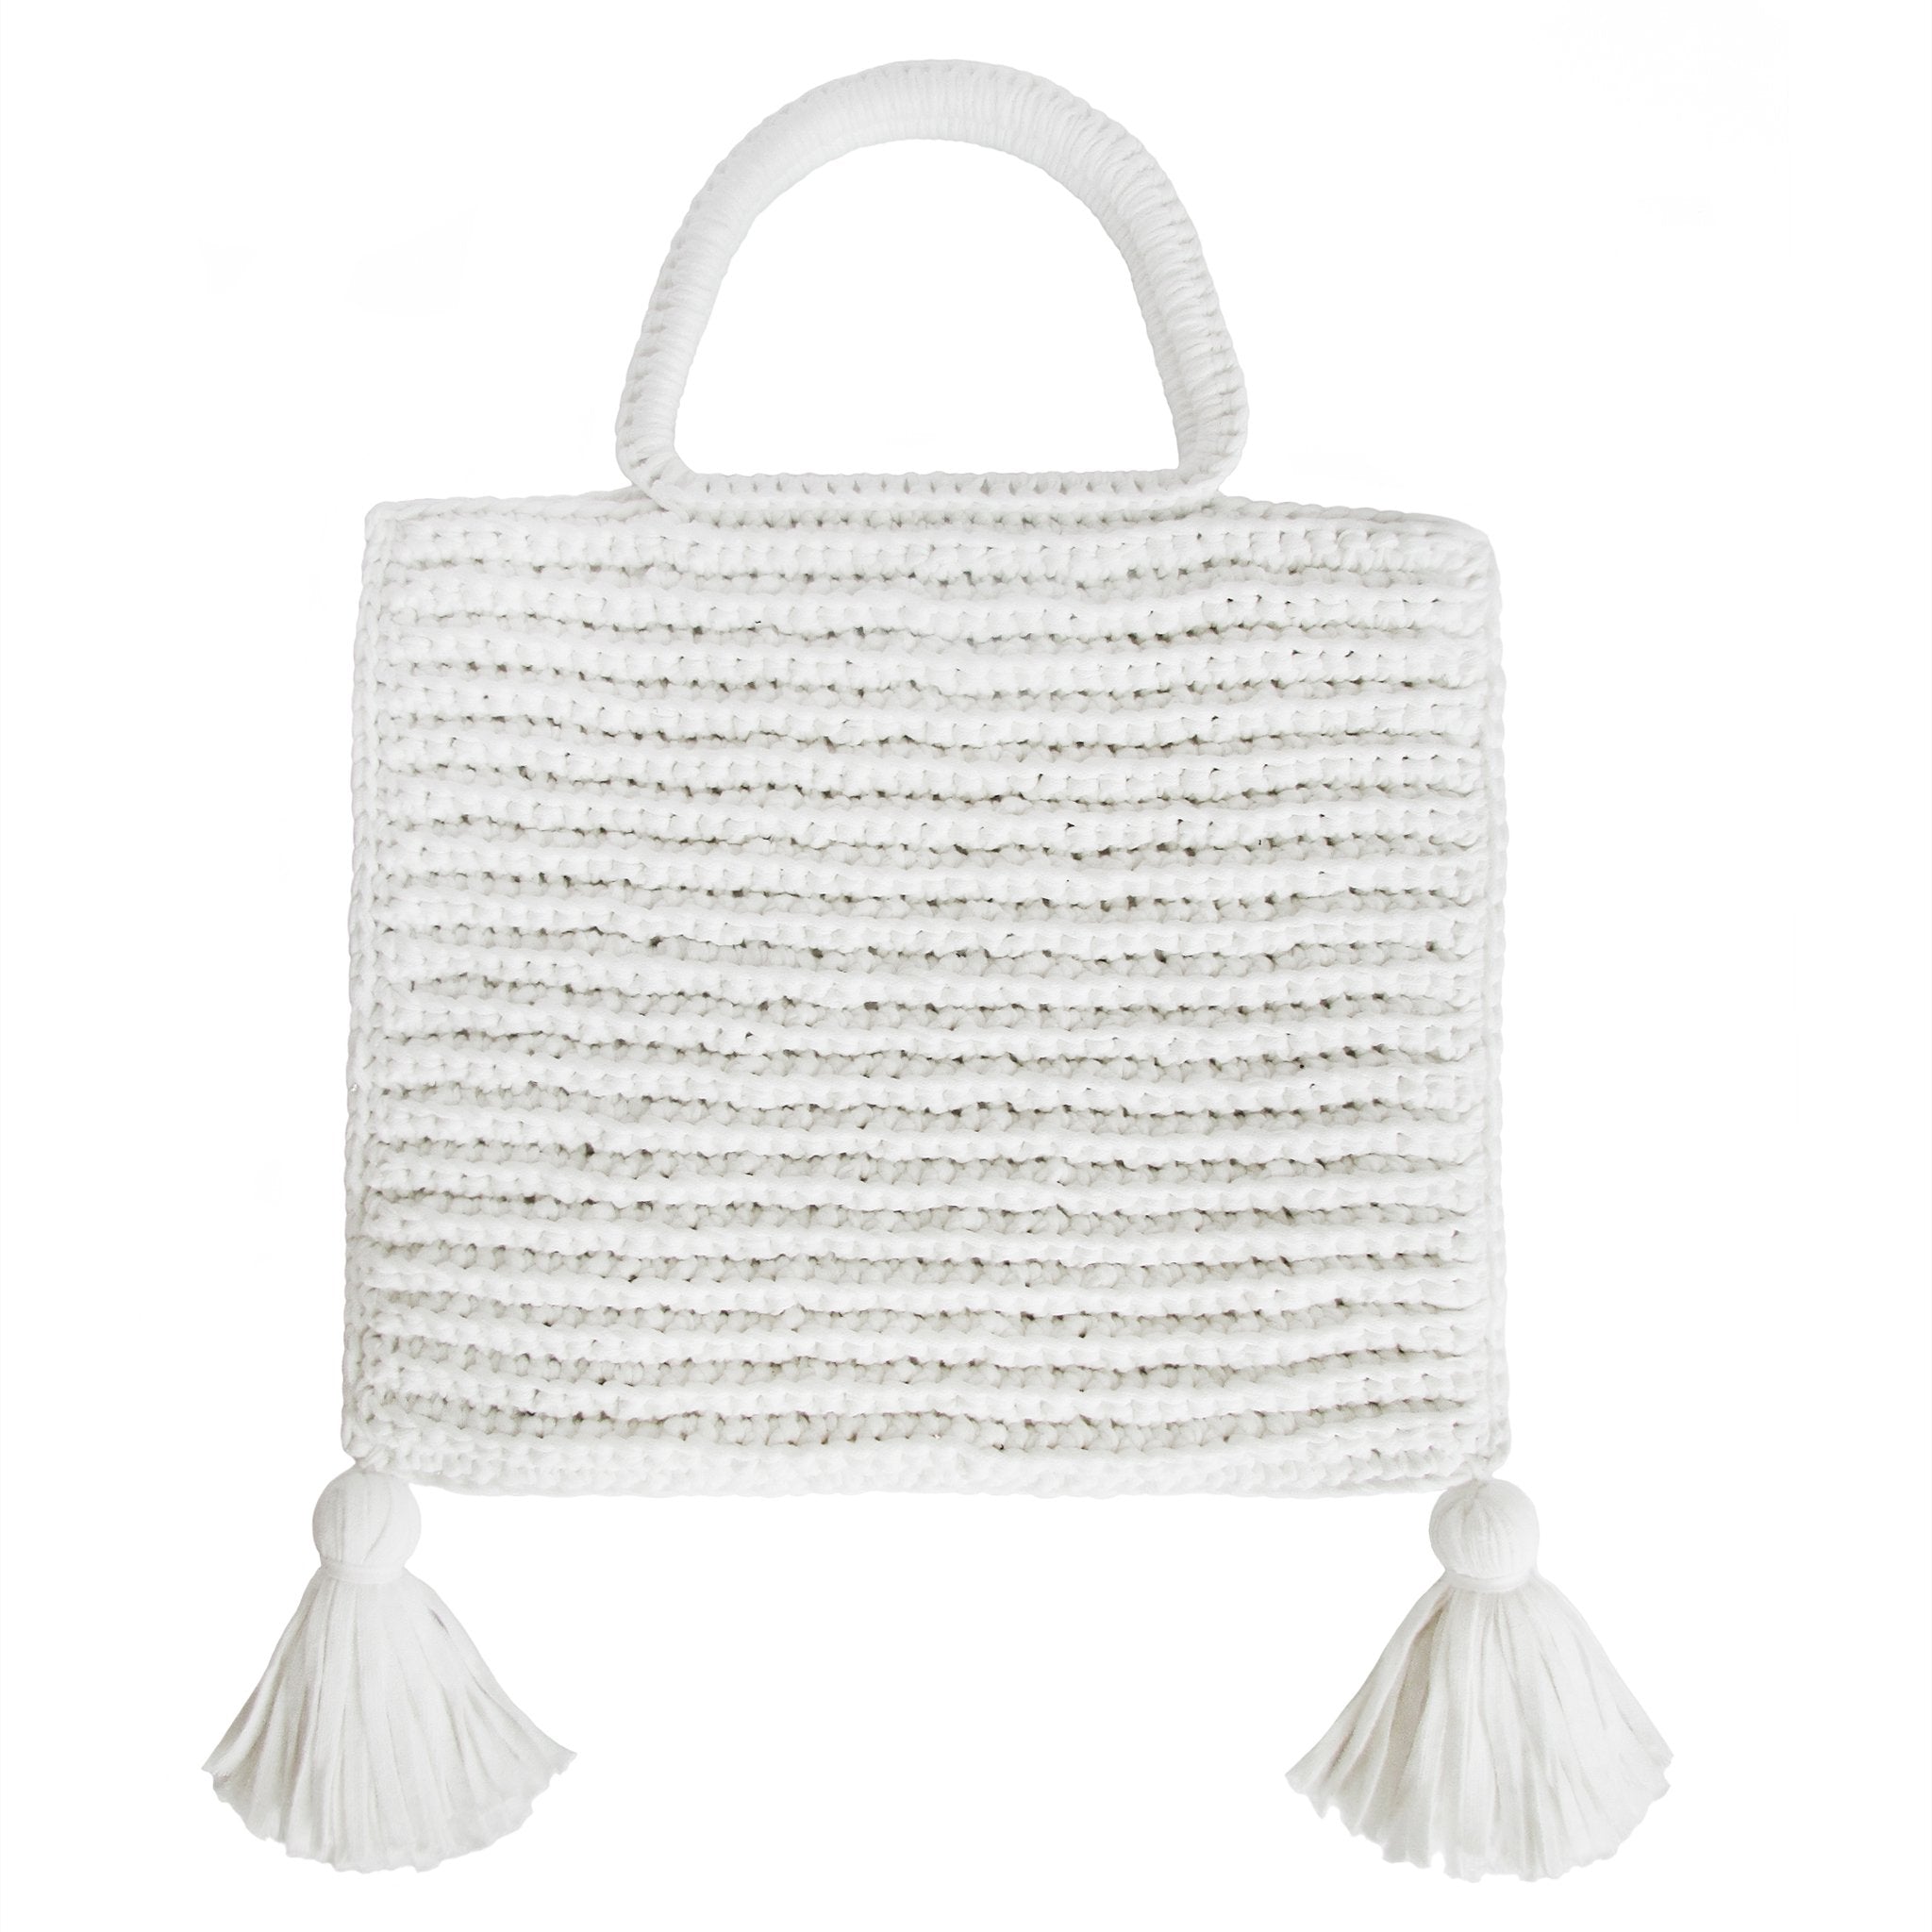 Handcrafted Cotton Tassel Tote bag in White by Binge Knitting